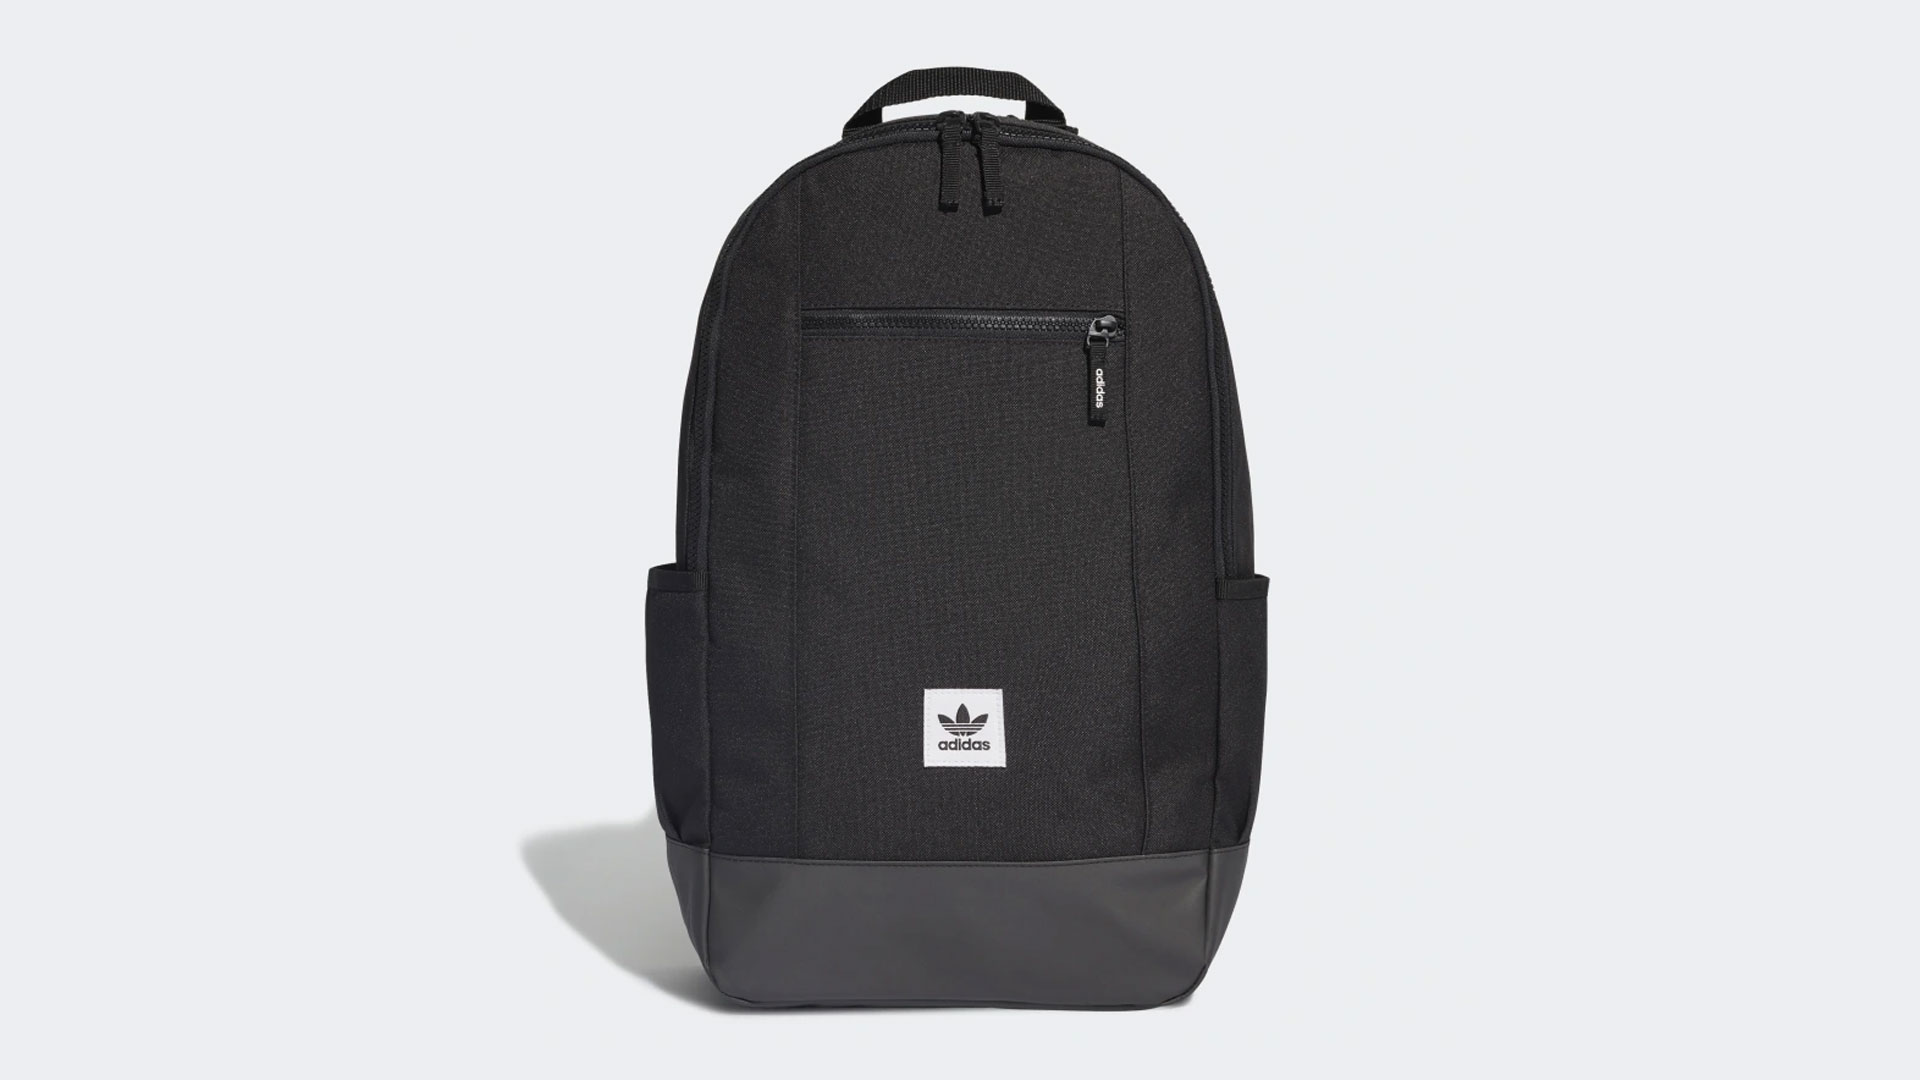 Best Adidas Backpacks: 5 Great Options to Consider 4